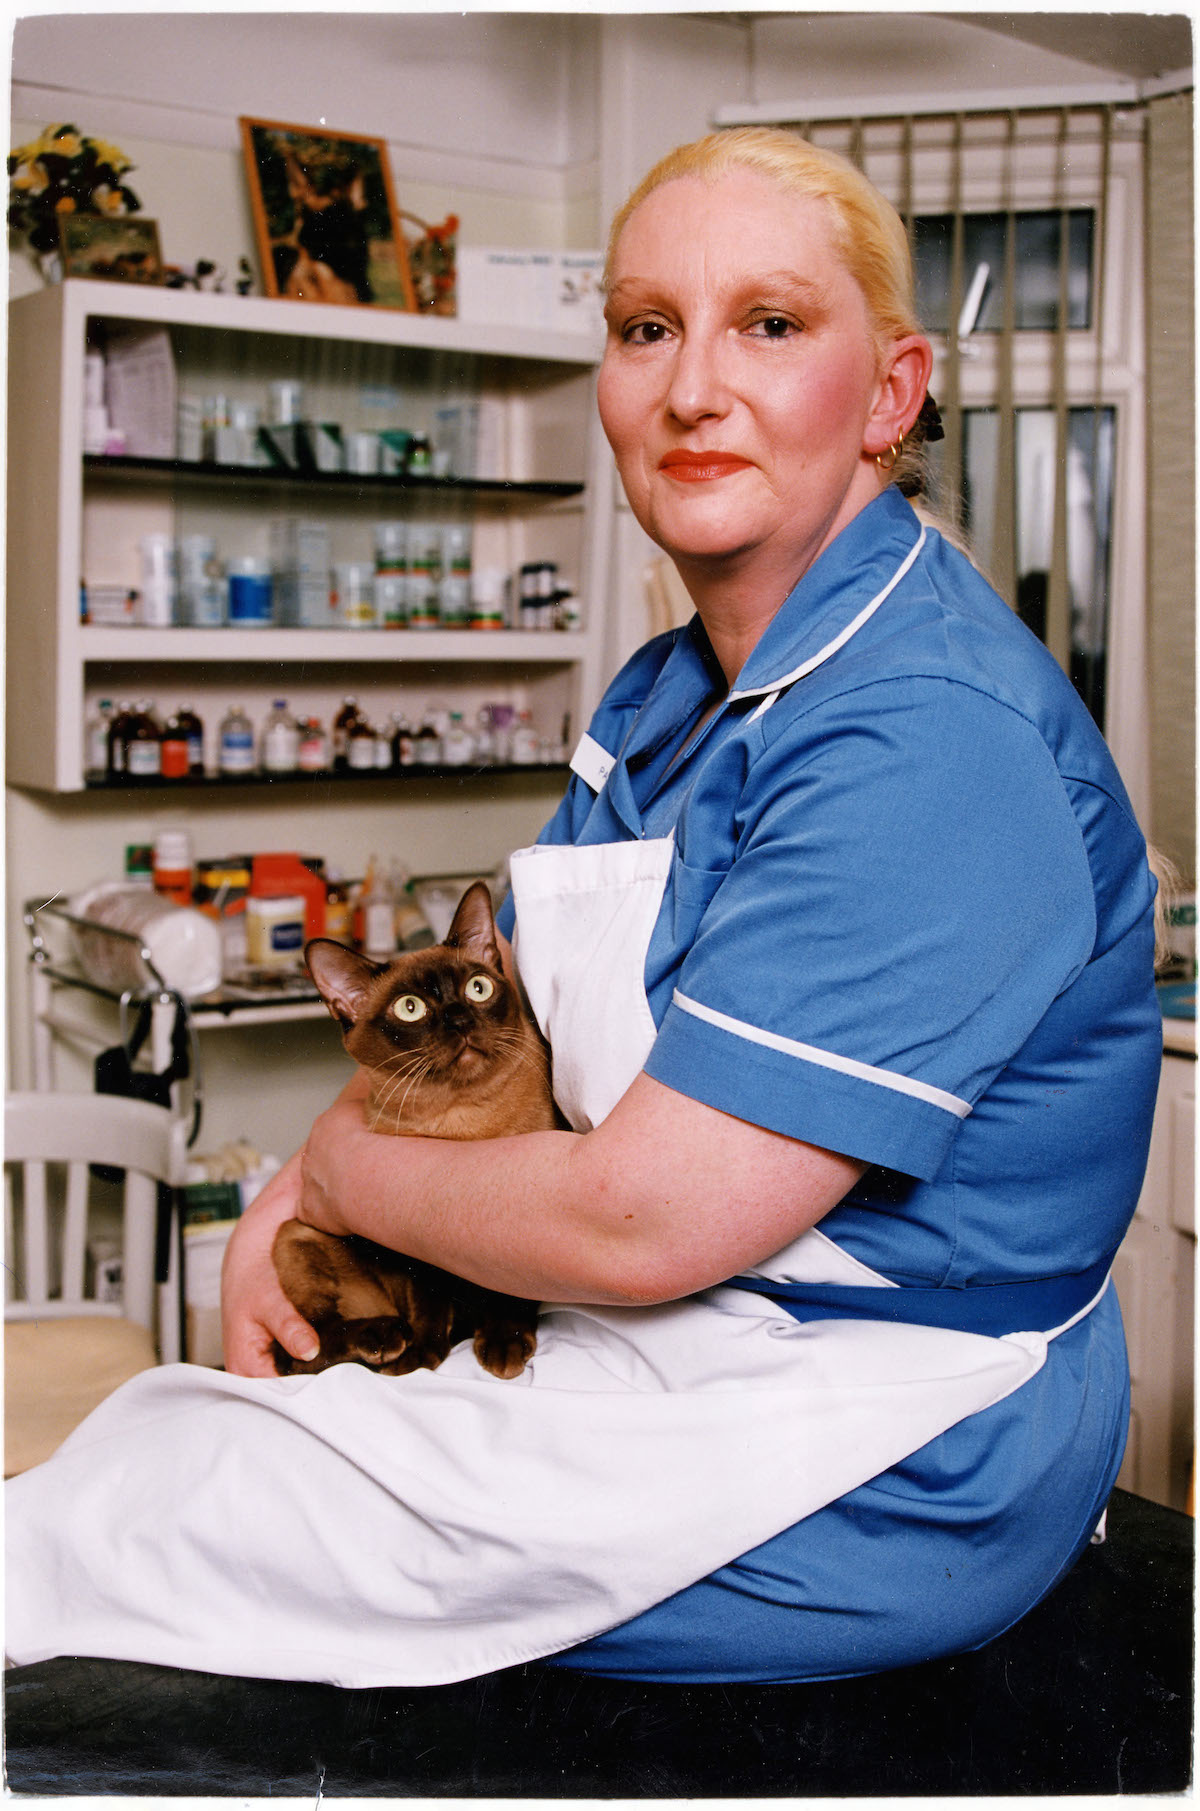 Jordan (real Name Pamela Rooke) Former Punk And Actress Now A Veterinary Nurse And Breeder Of Burmese Cats In Seaford Sussex 1994. 15 Feb 1994